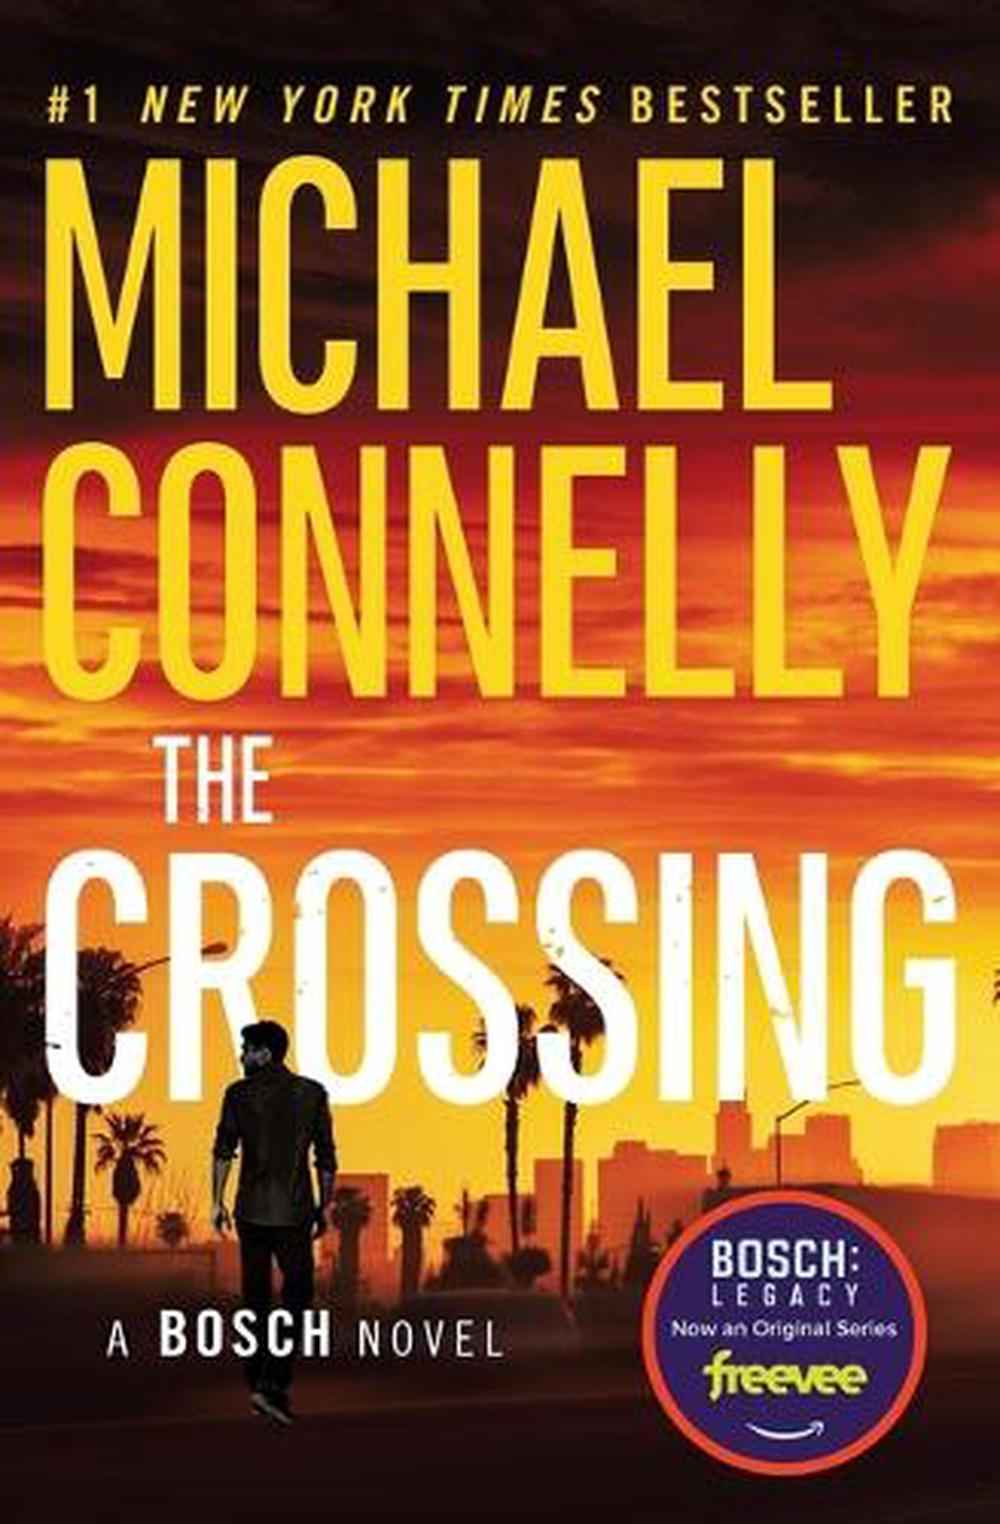 the crossing book by michael connelly